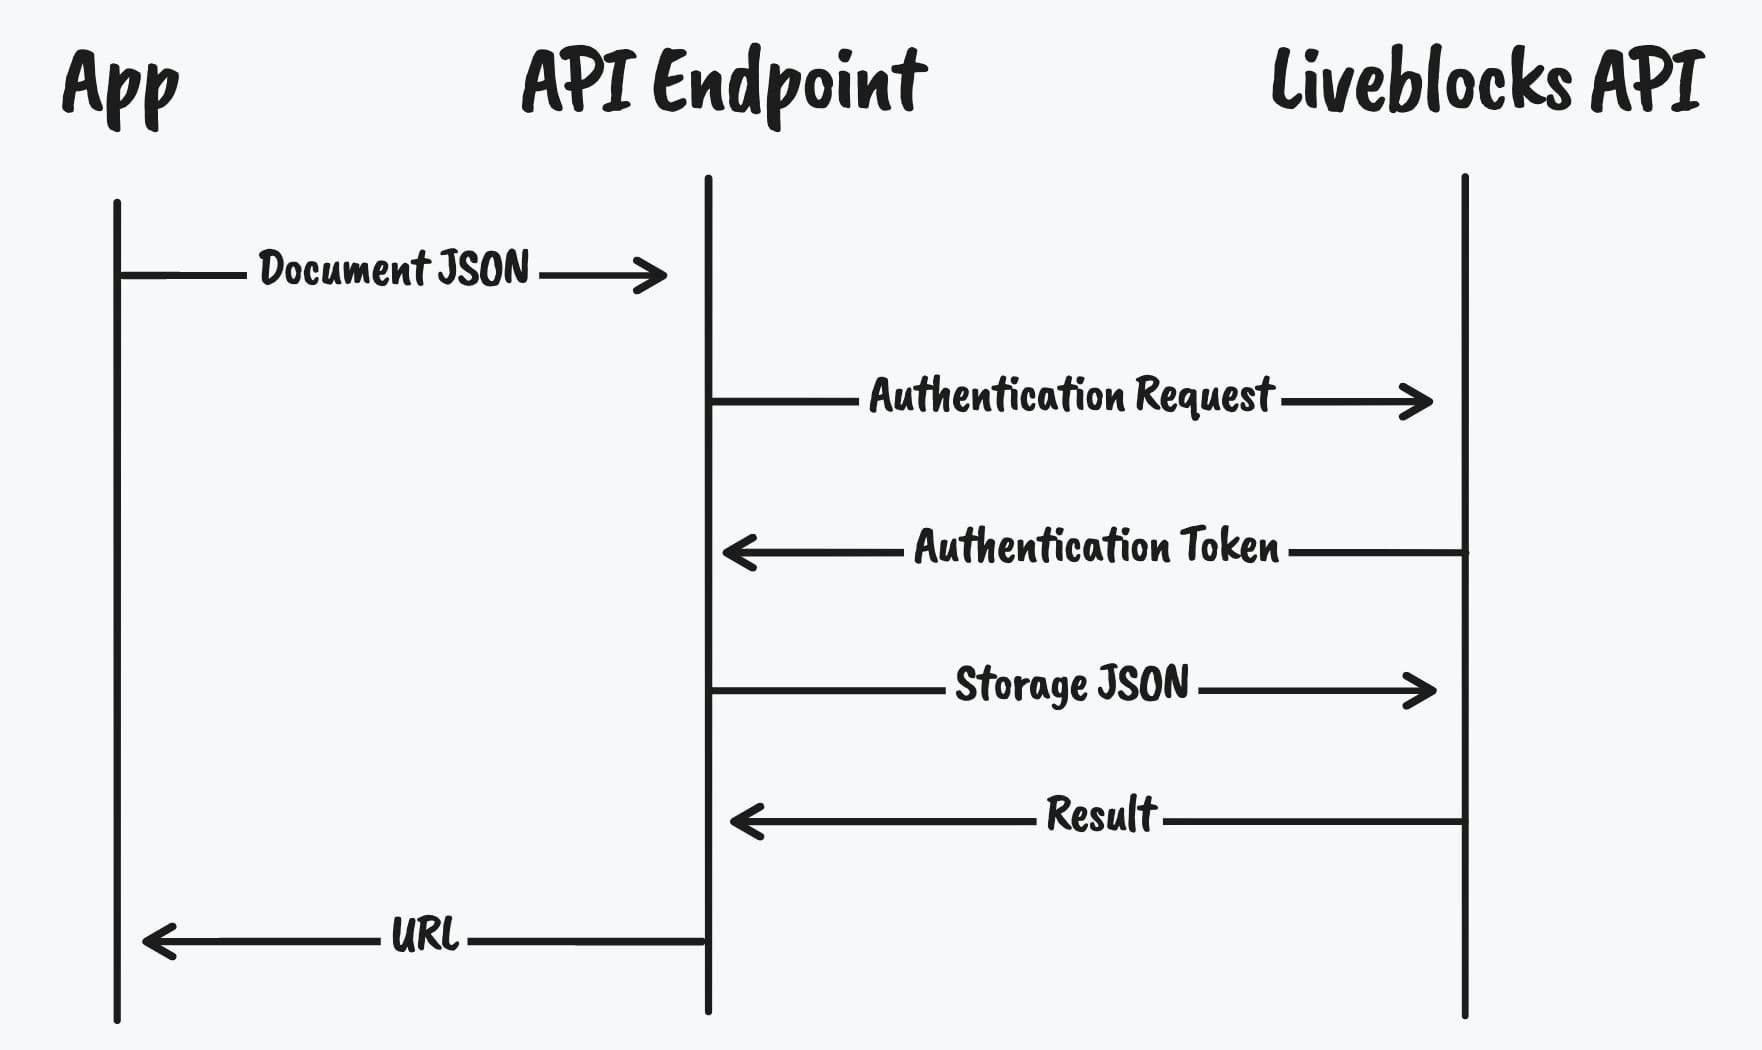 A diagram showing which requests will be made between the app, the endpoint, and the Liveblocks API.